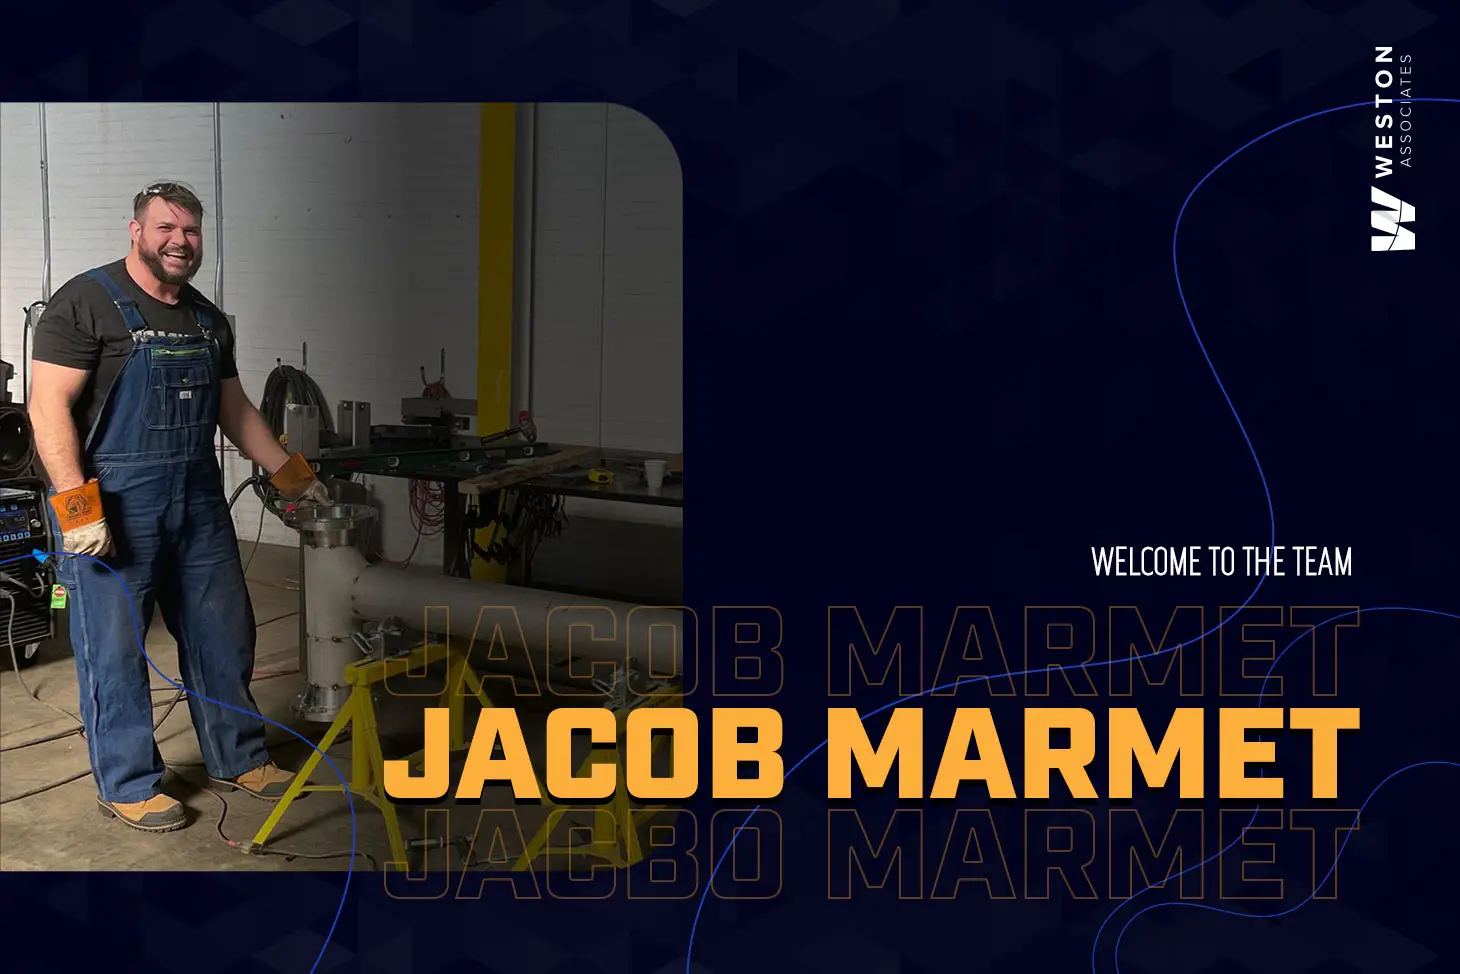 We are excited to welcome Jacob Marmet! featured image